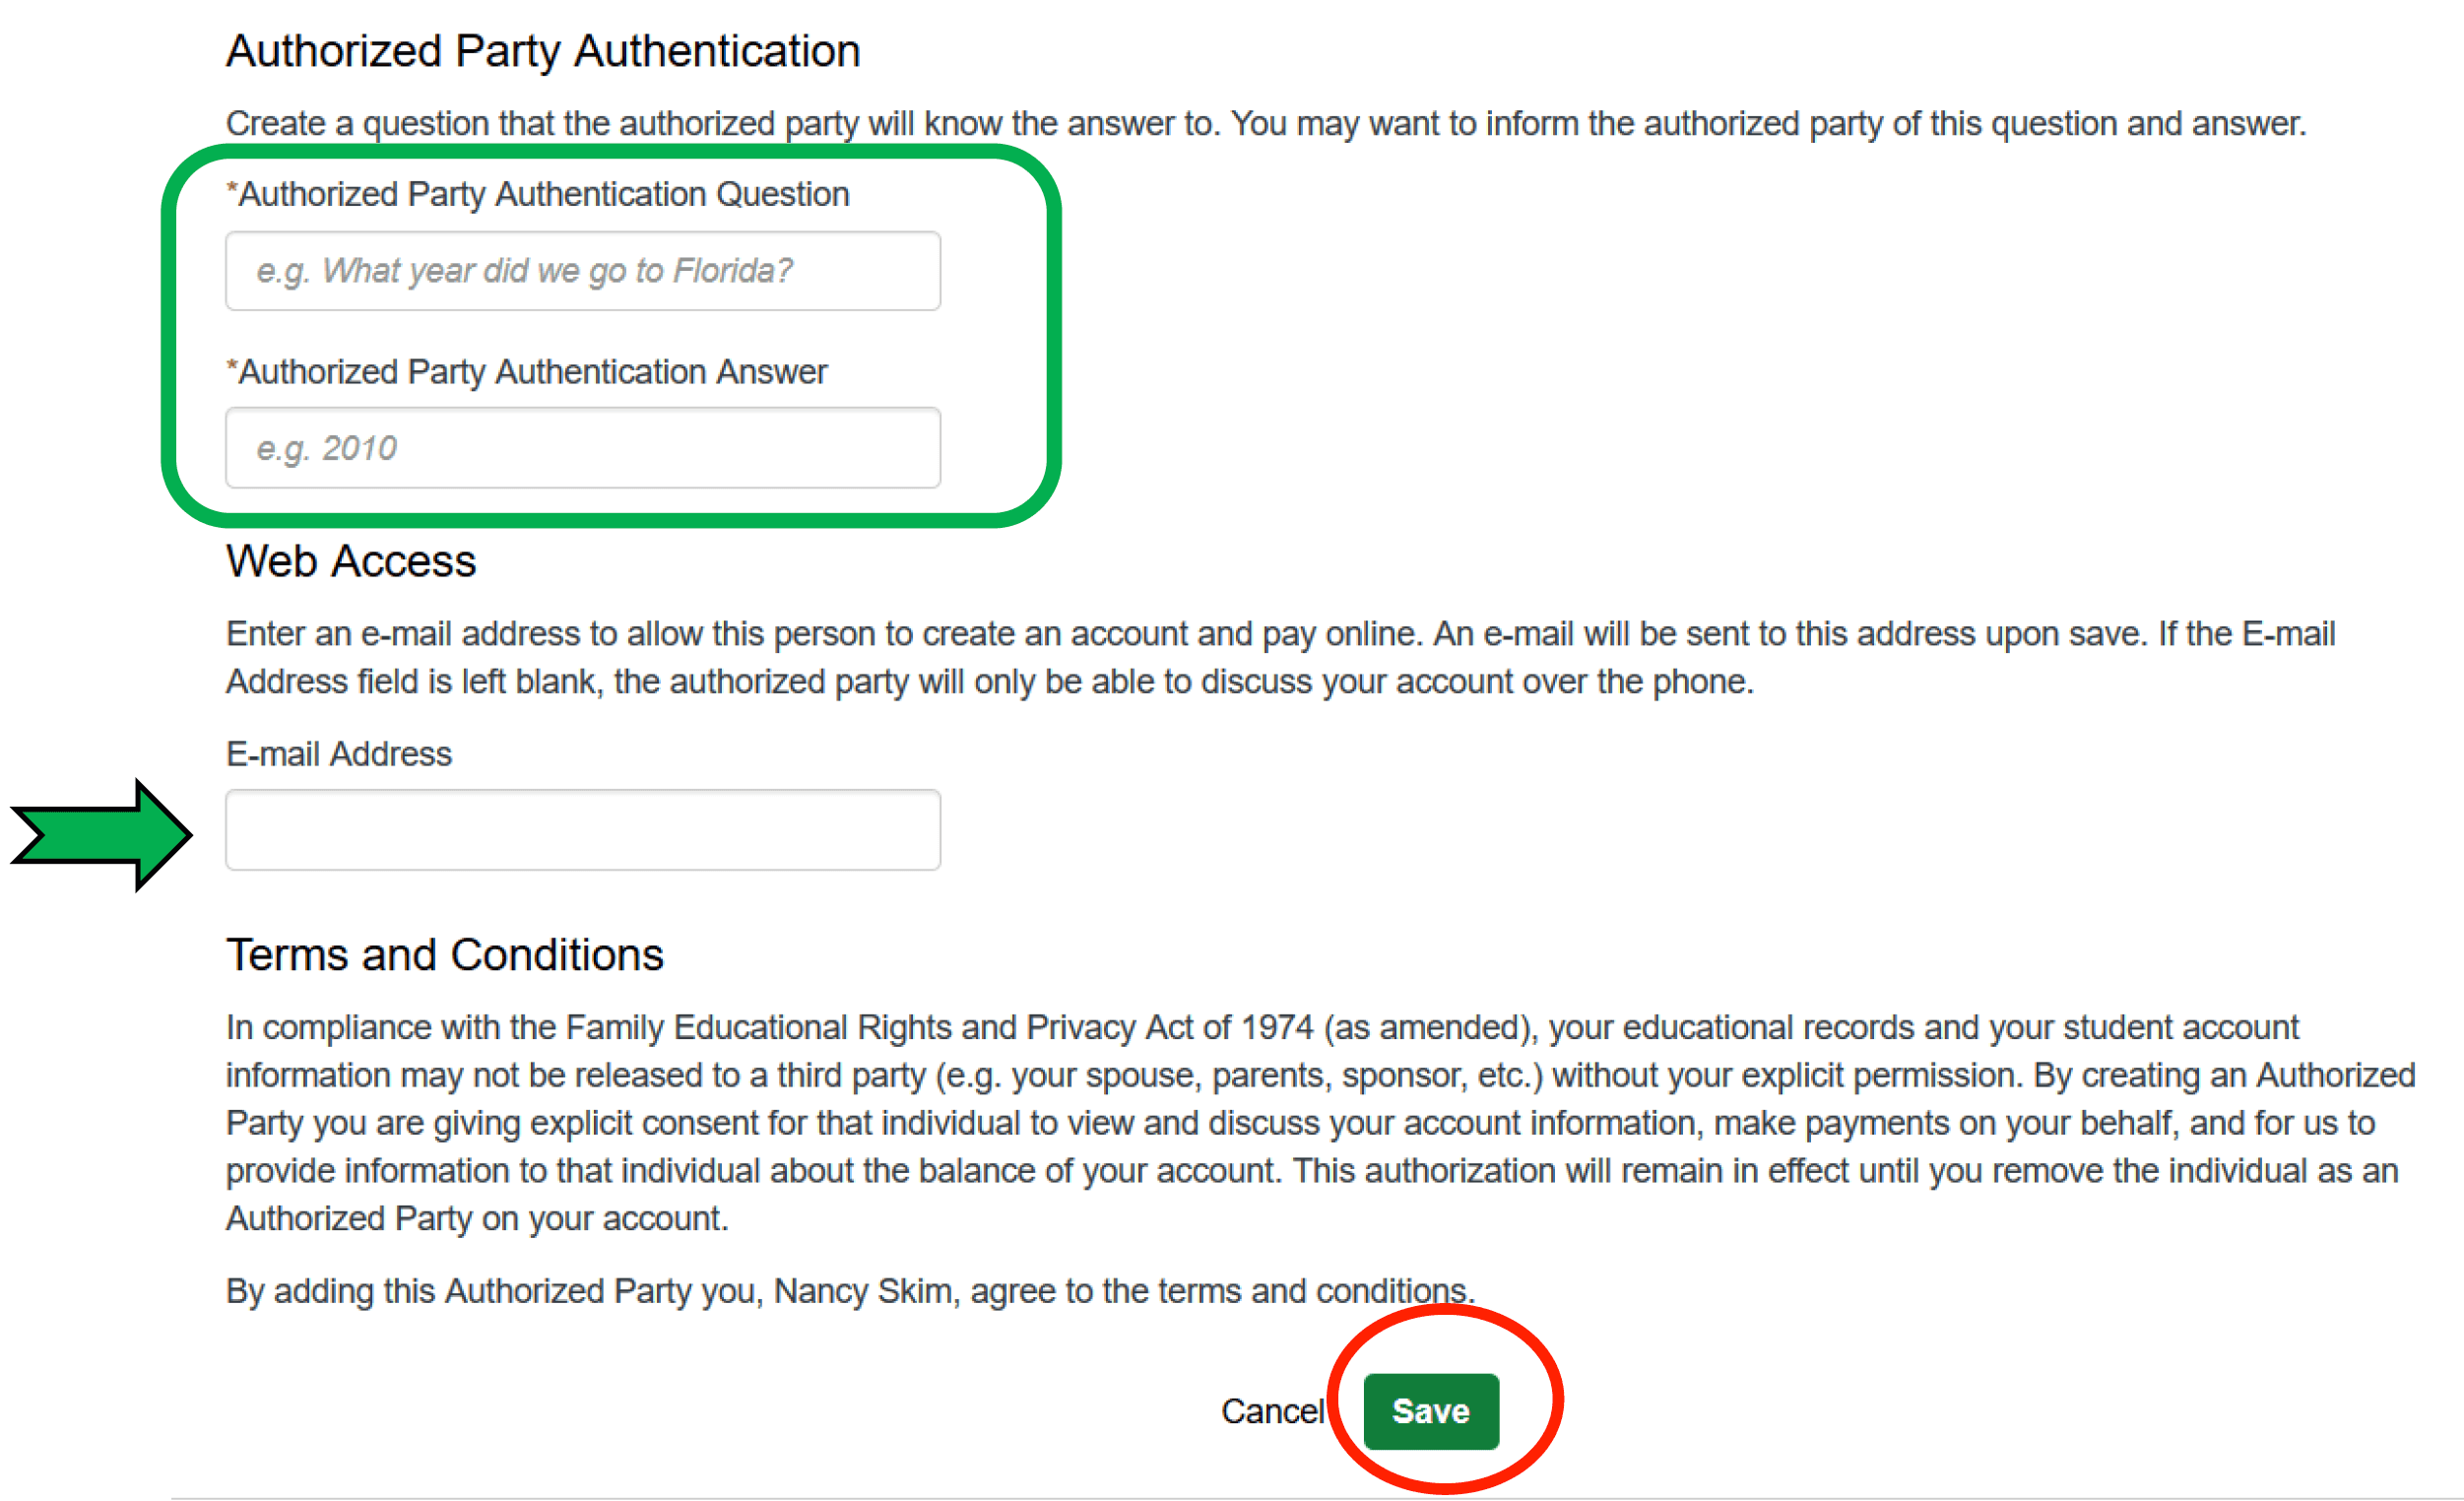 Authorized Party Authentication screen with Authroized Party Authentication question and answer fields circled. Arrow pointing to the email address field and the save button is circled.